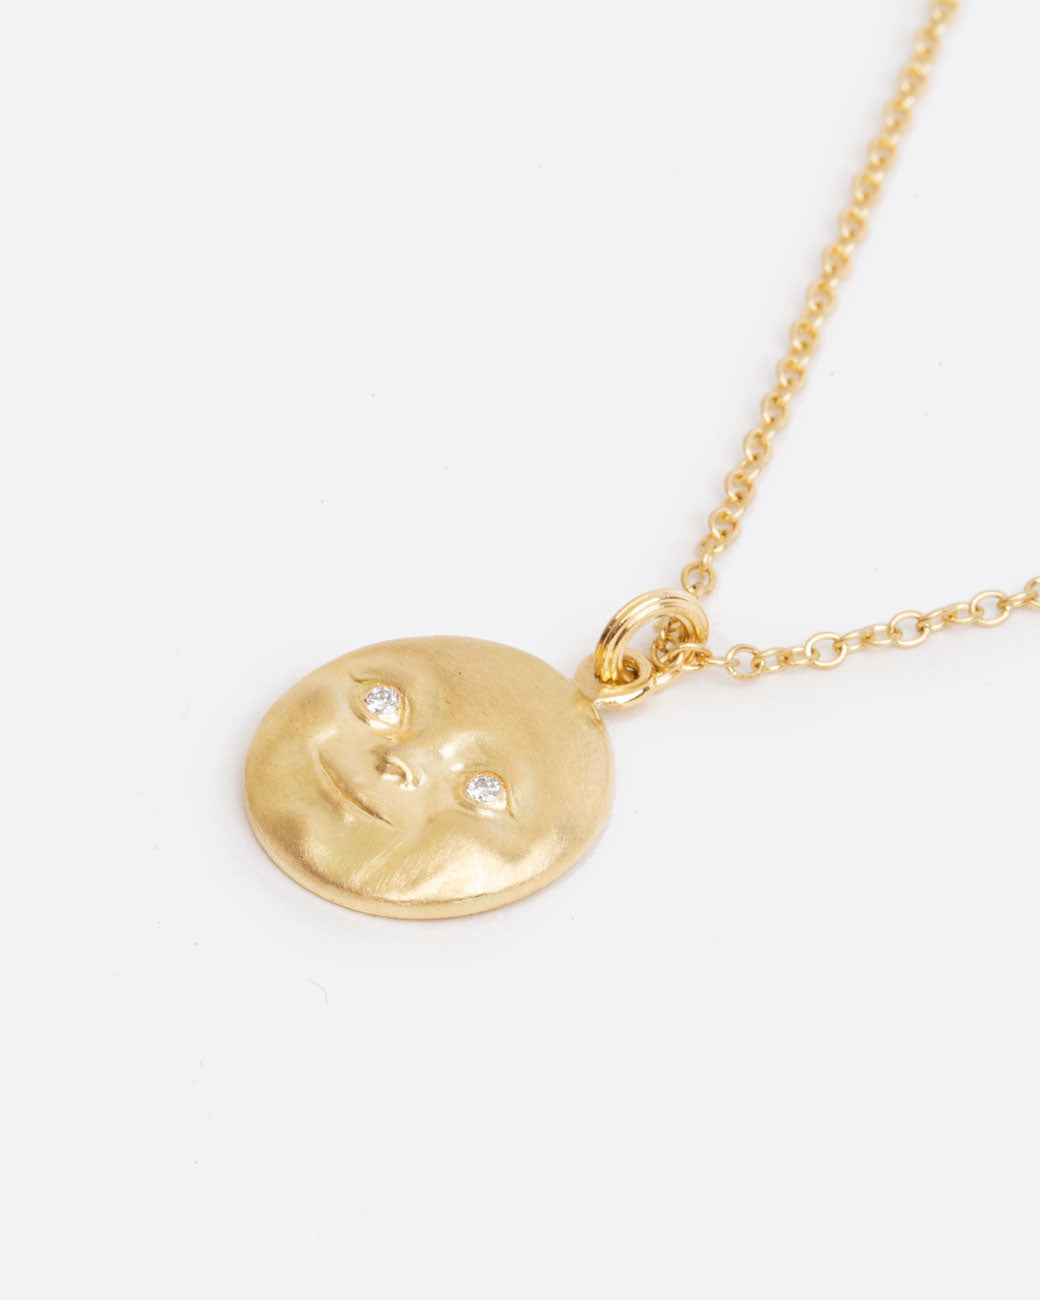 A highly detailed moonface, with little diamonds eyes hangs from a sturdy chain